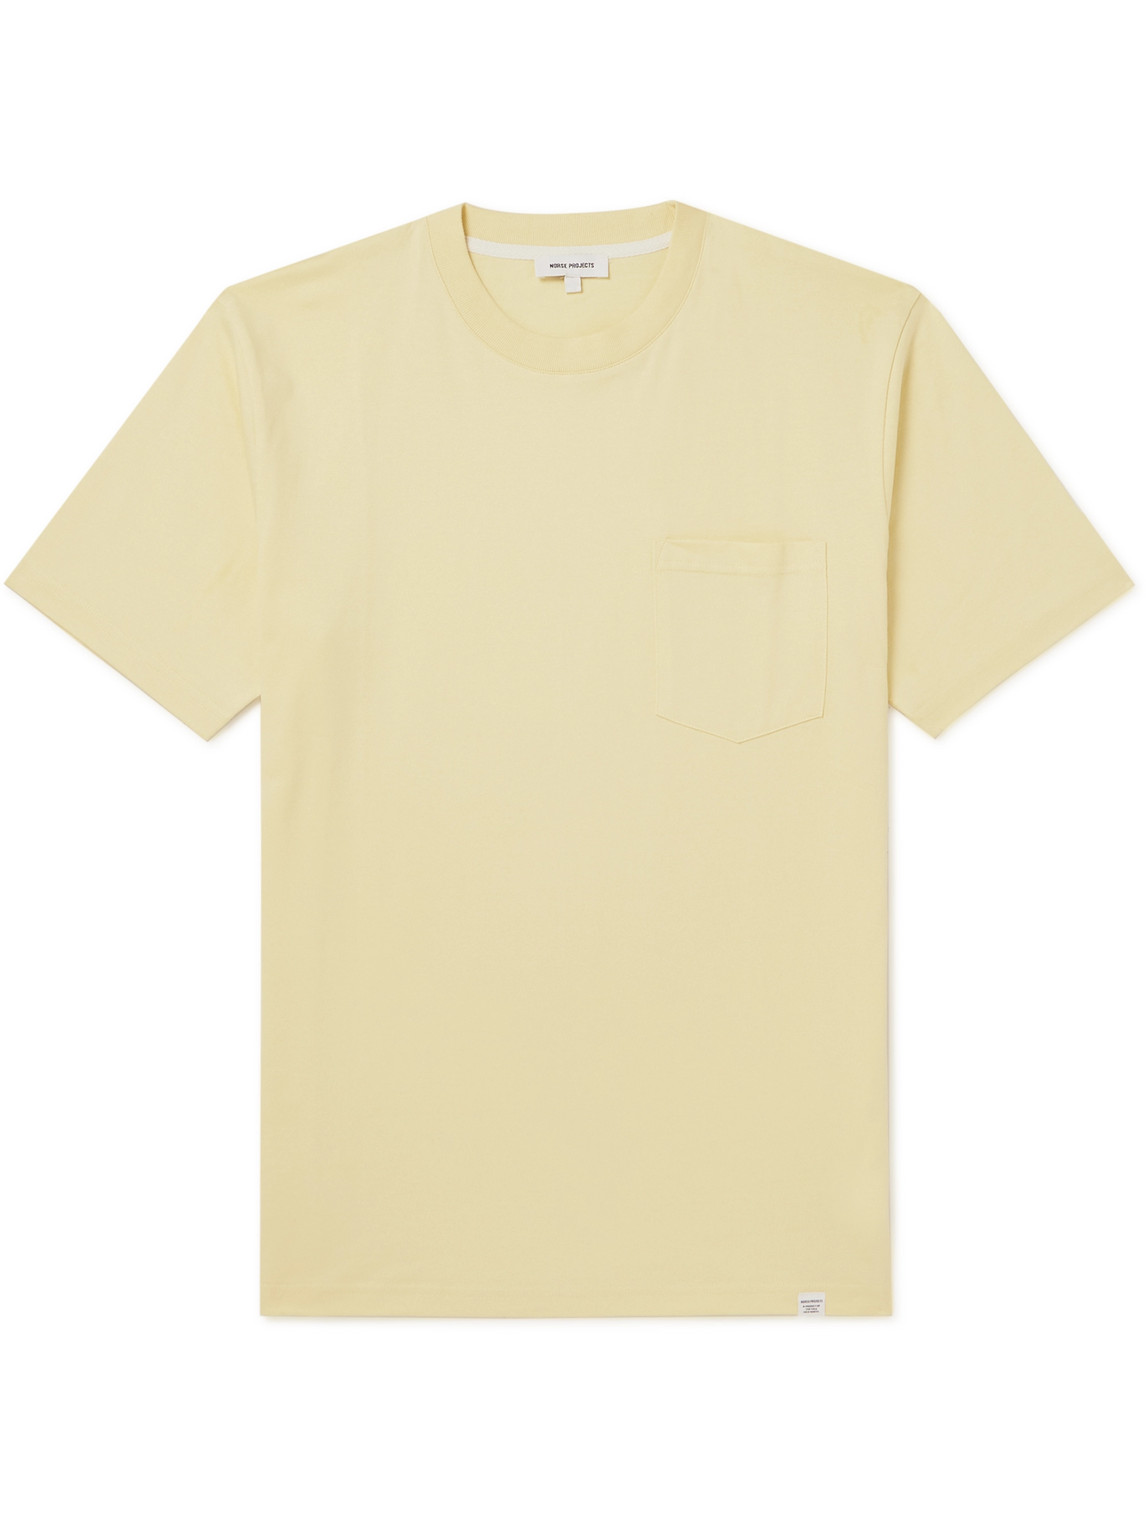 NORSE PROJECTS JOHANNES ORGANIC COTTON-JERSEY T-SHIRT